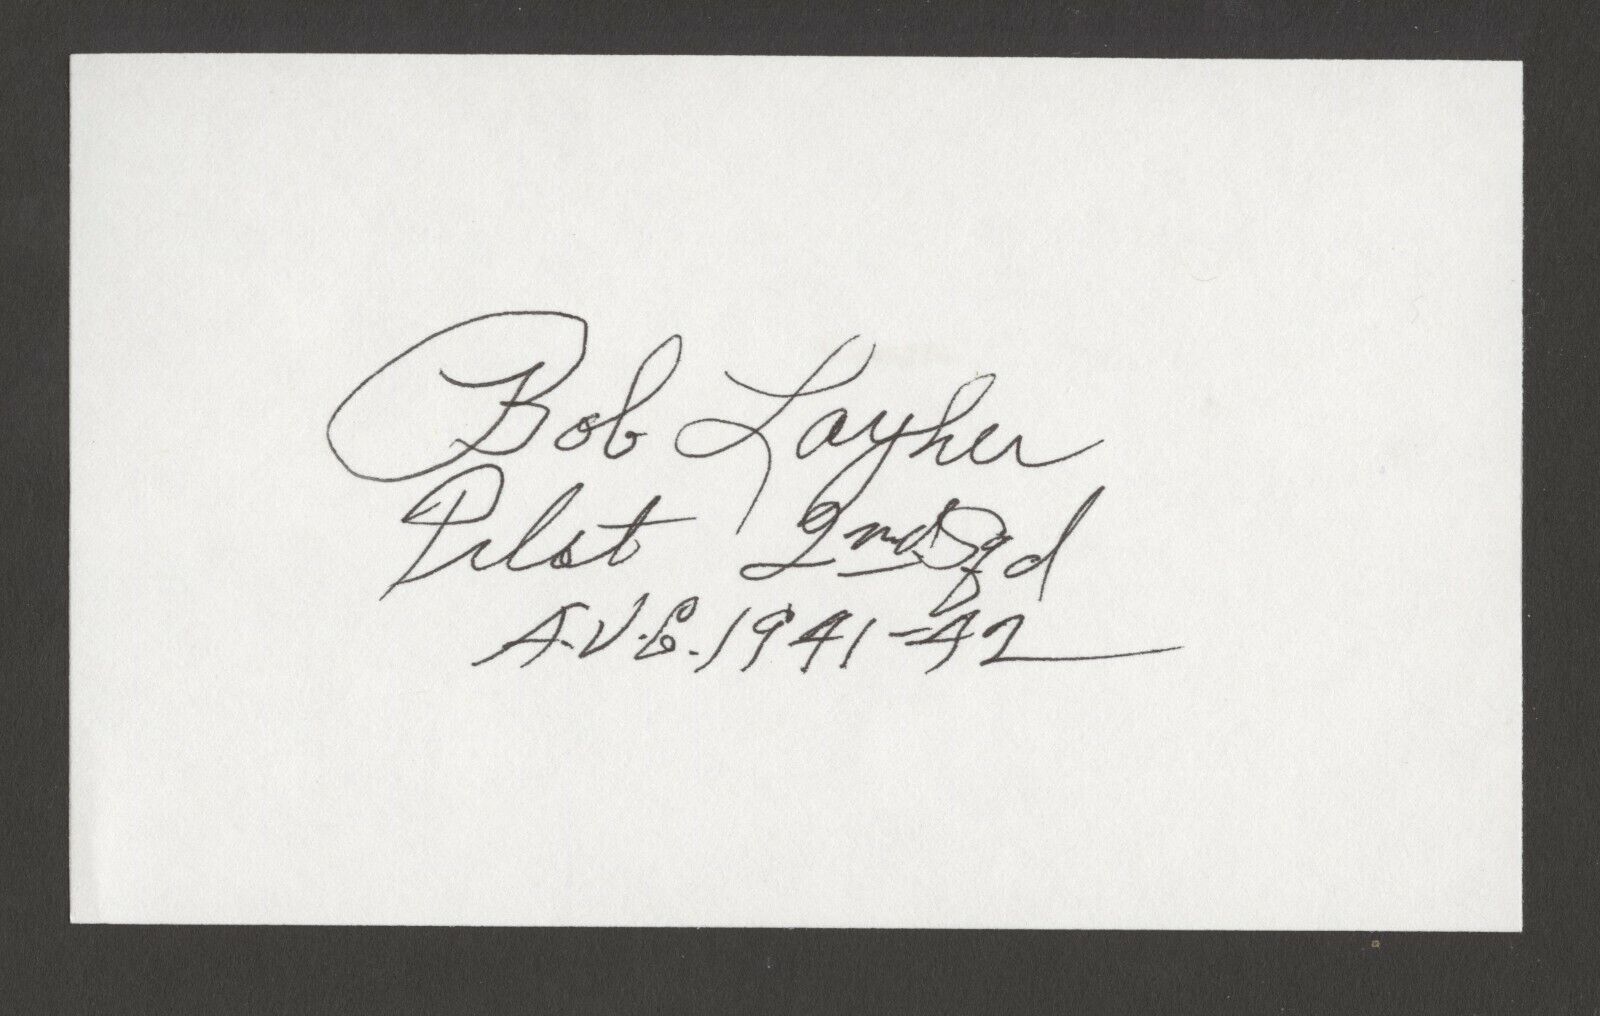 Robert Bob Layher d2006 signed autograph 3x5 card Flying Tiger AVG WWII W154